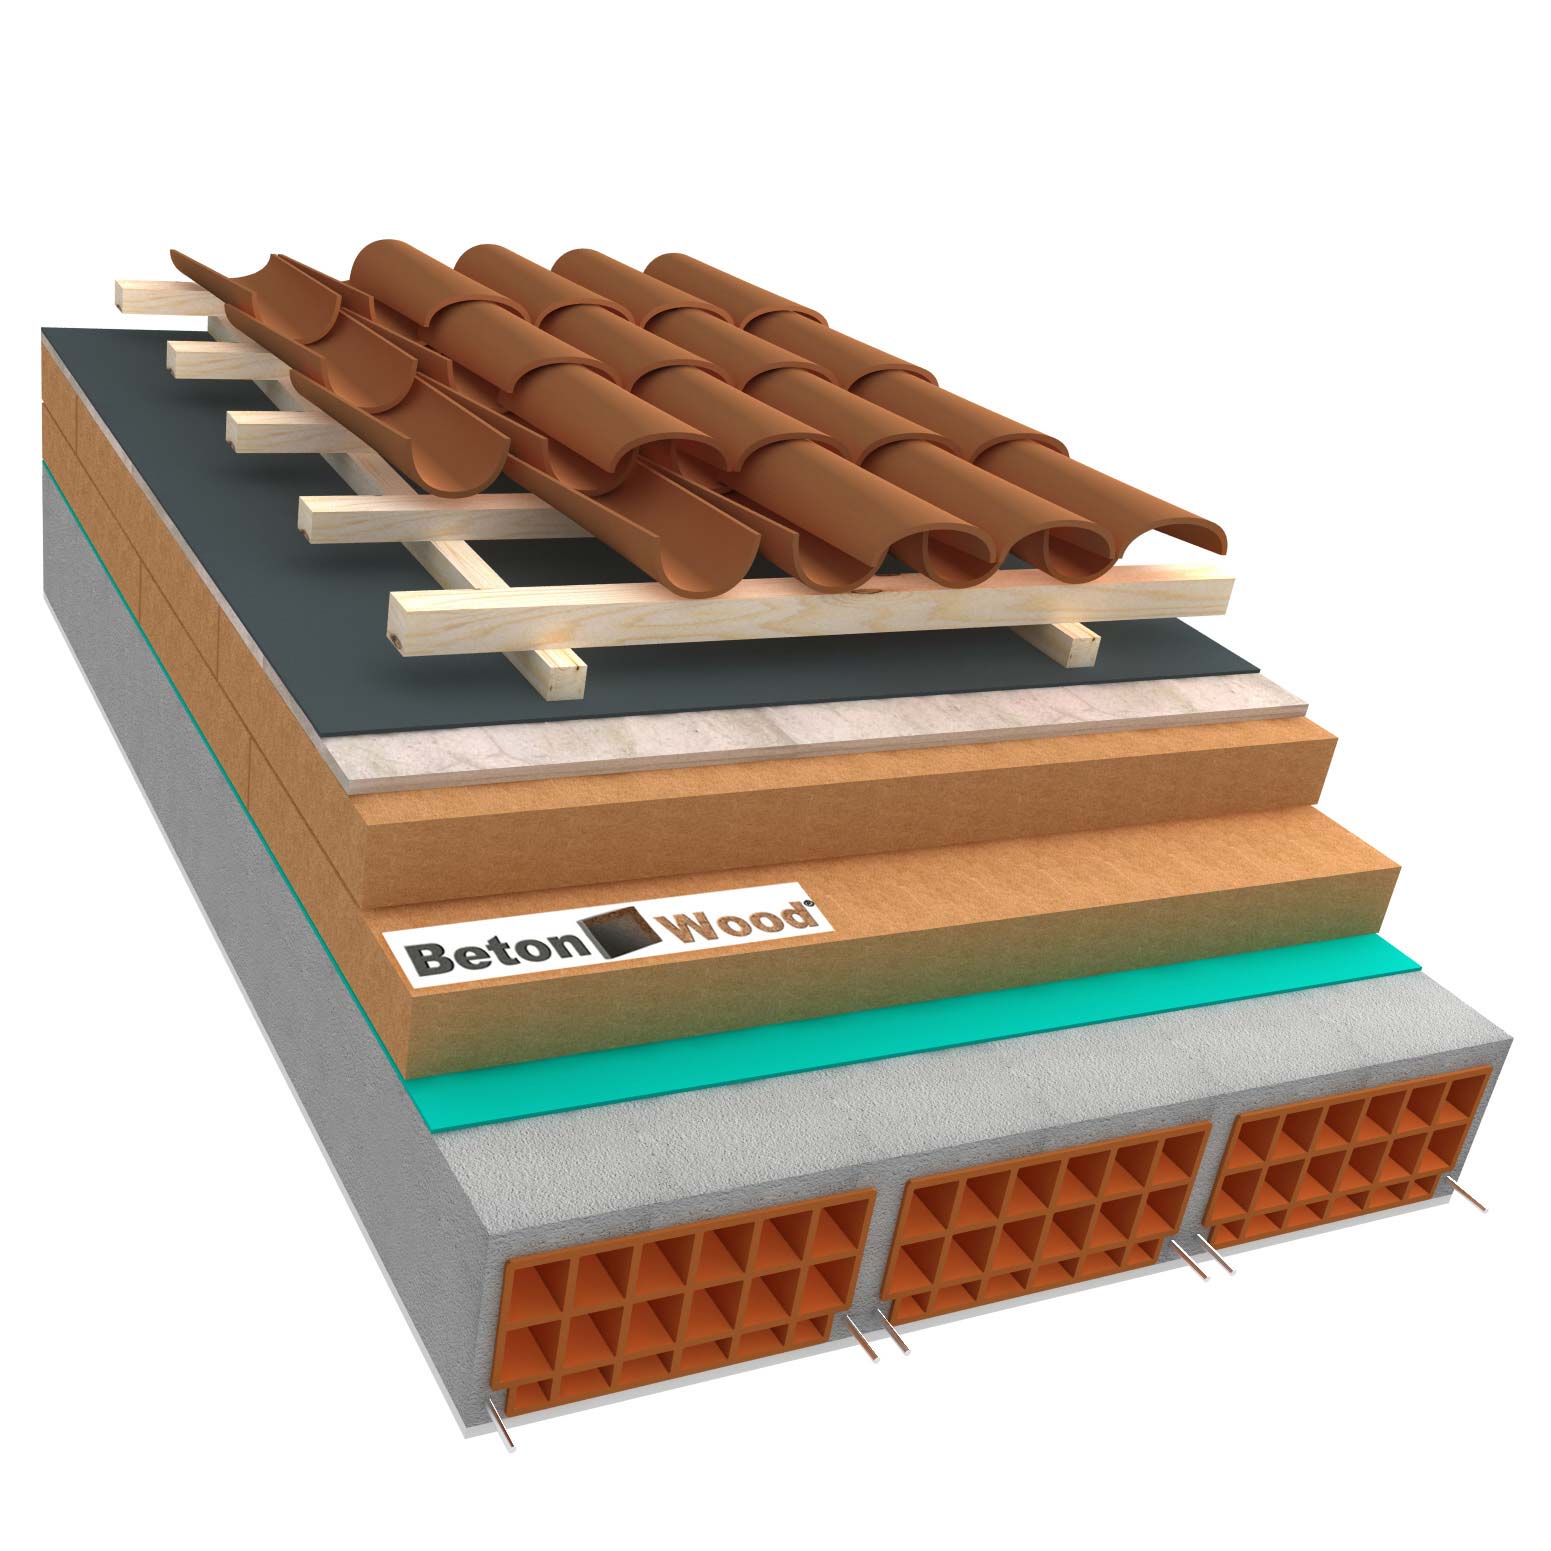 Ventilated roof with wood fiber Universal dry and cement bonded particle boards on concrete